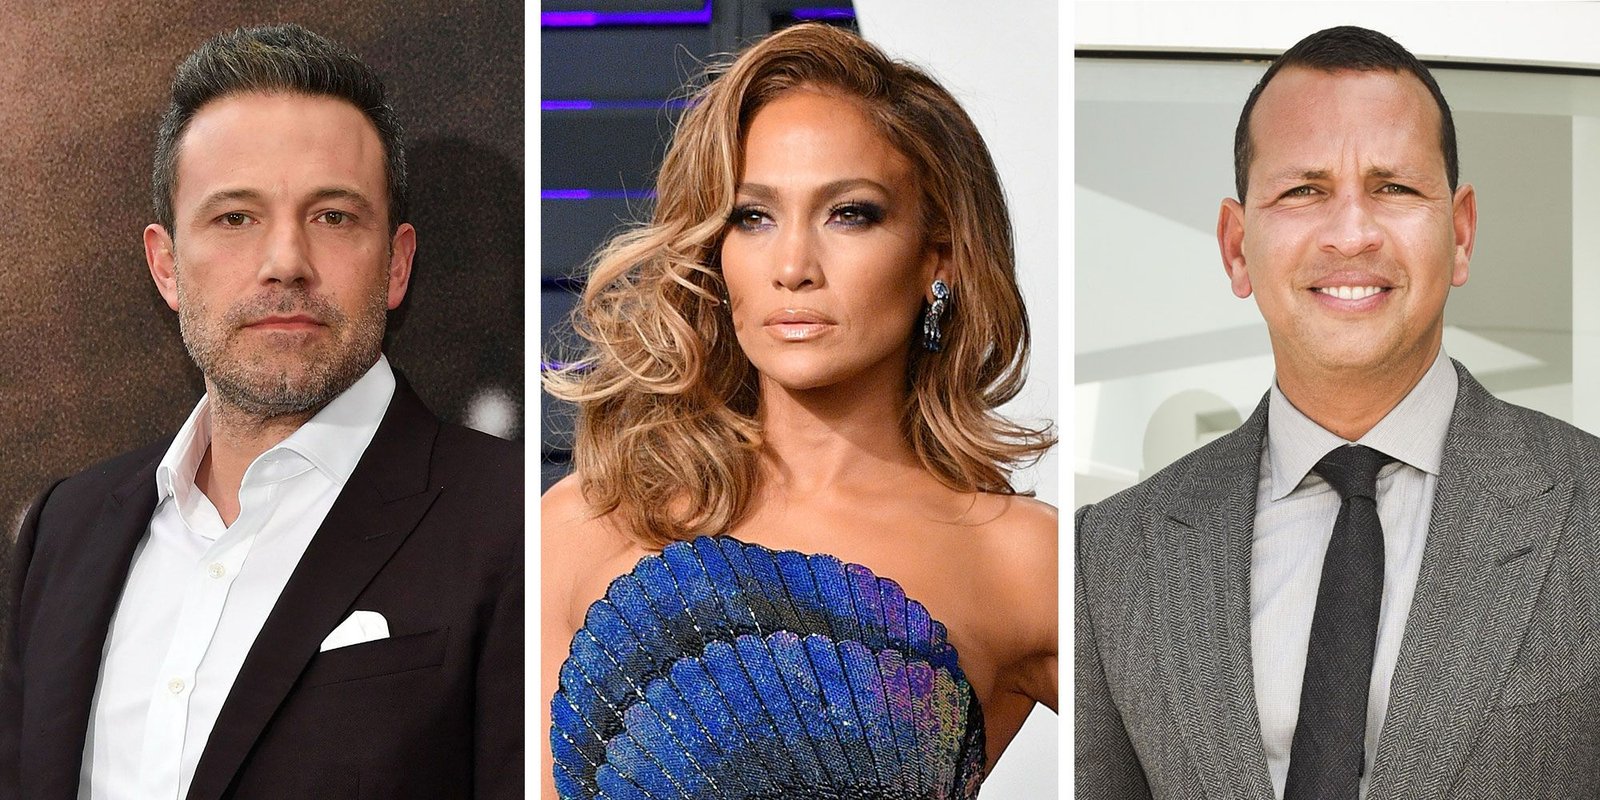 Alex Rodriguez spoke for the first time about breaking up with the JLO: "I learned my lesson"